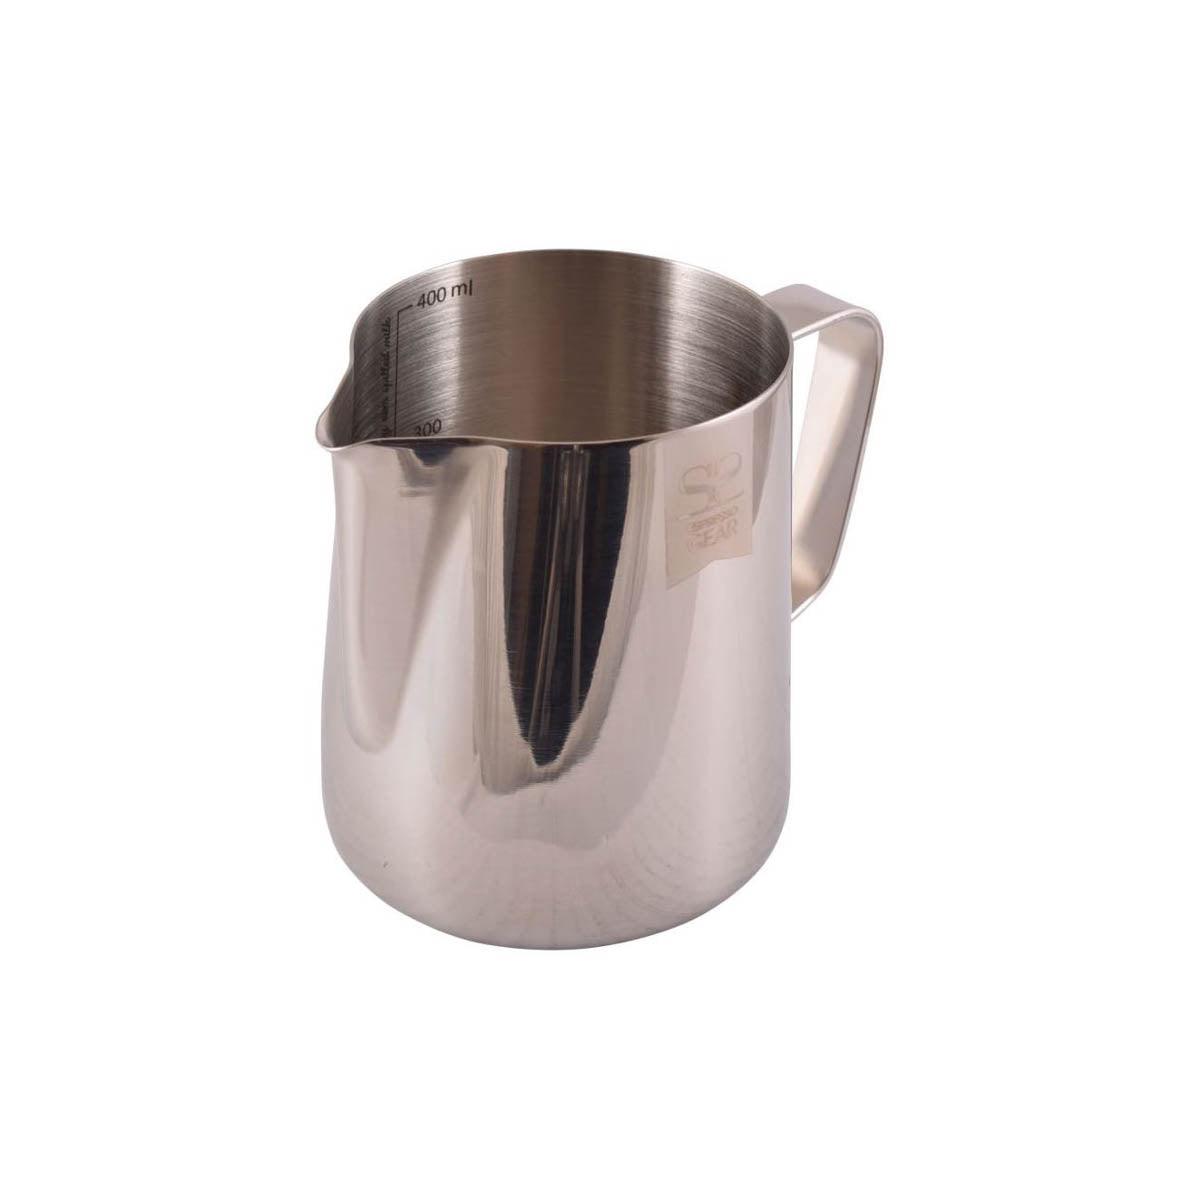 Espresso Gear Lined Frothing Pitcher, Stainless Steel, 0.4 L